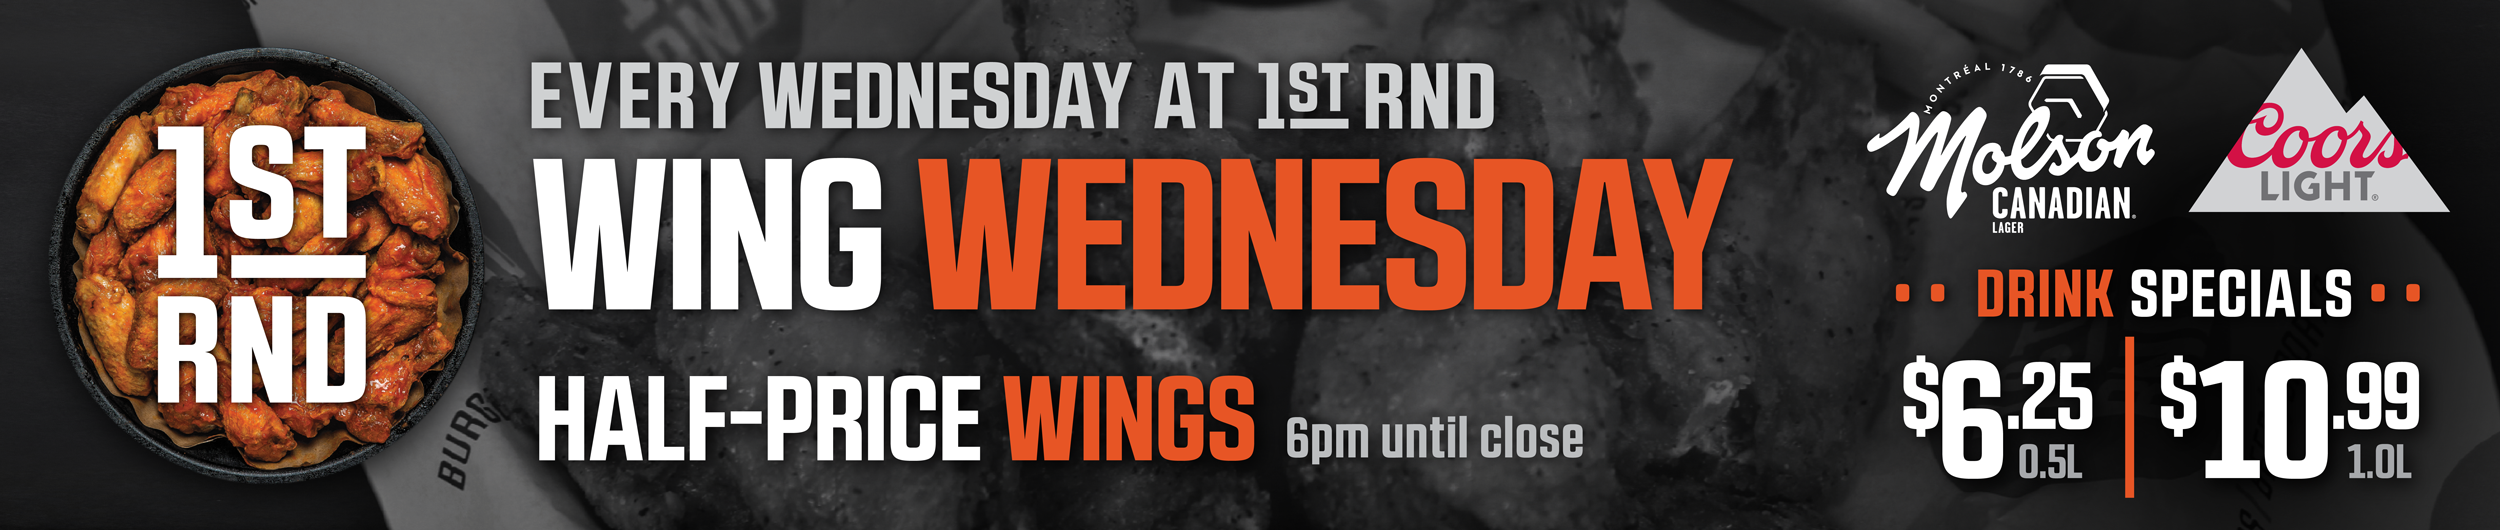 wing-wednesday-background